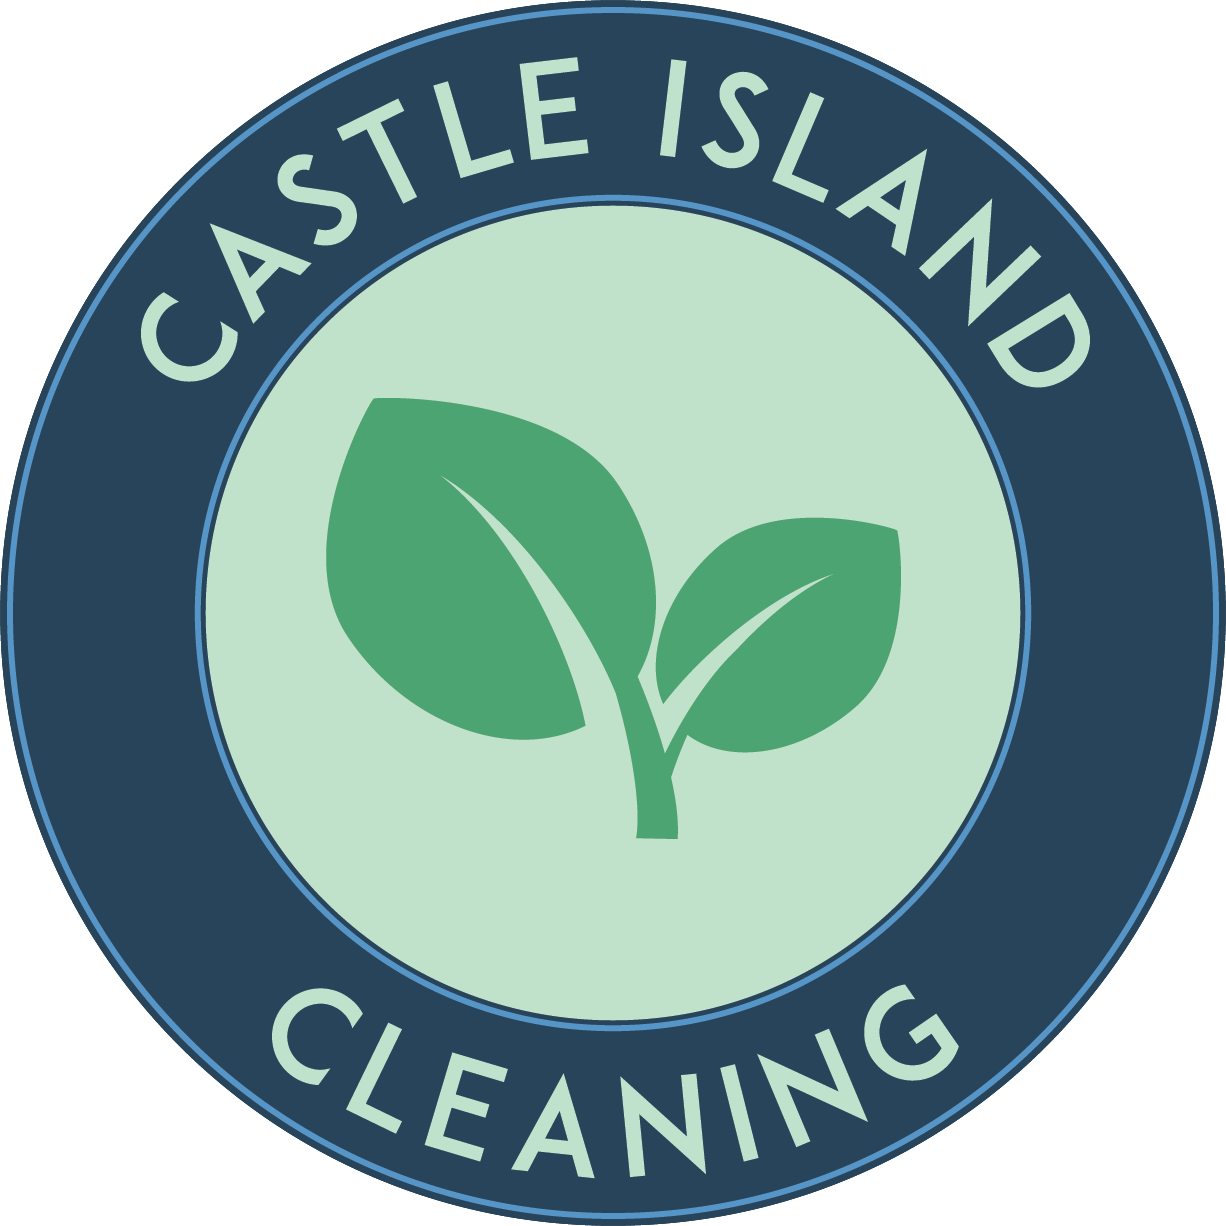 Castle Island Cleaning